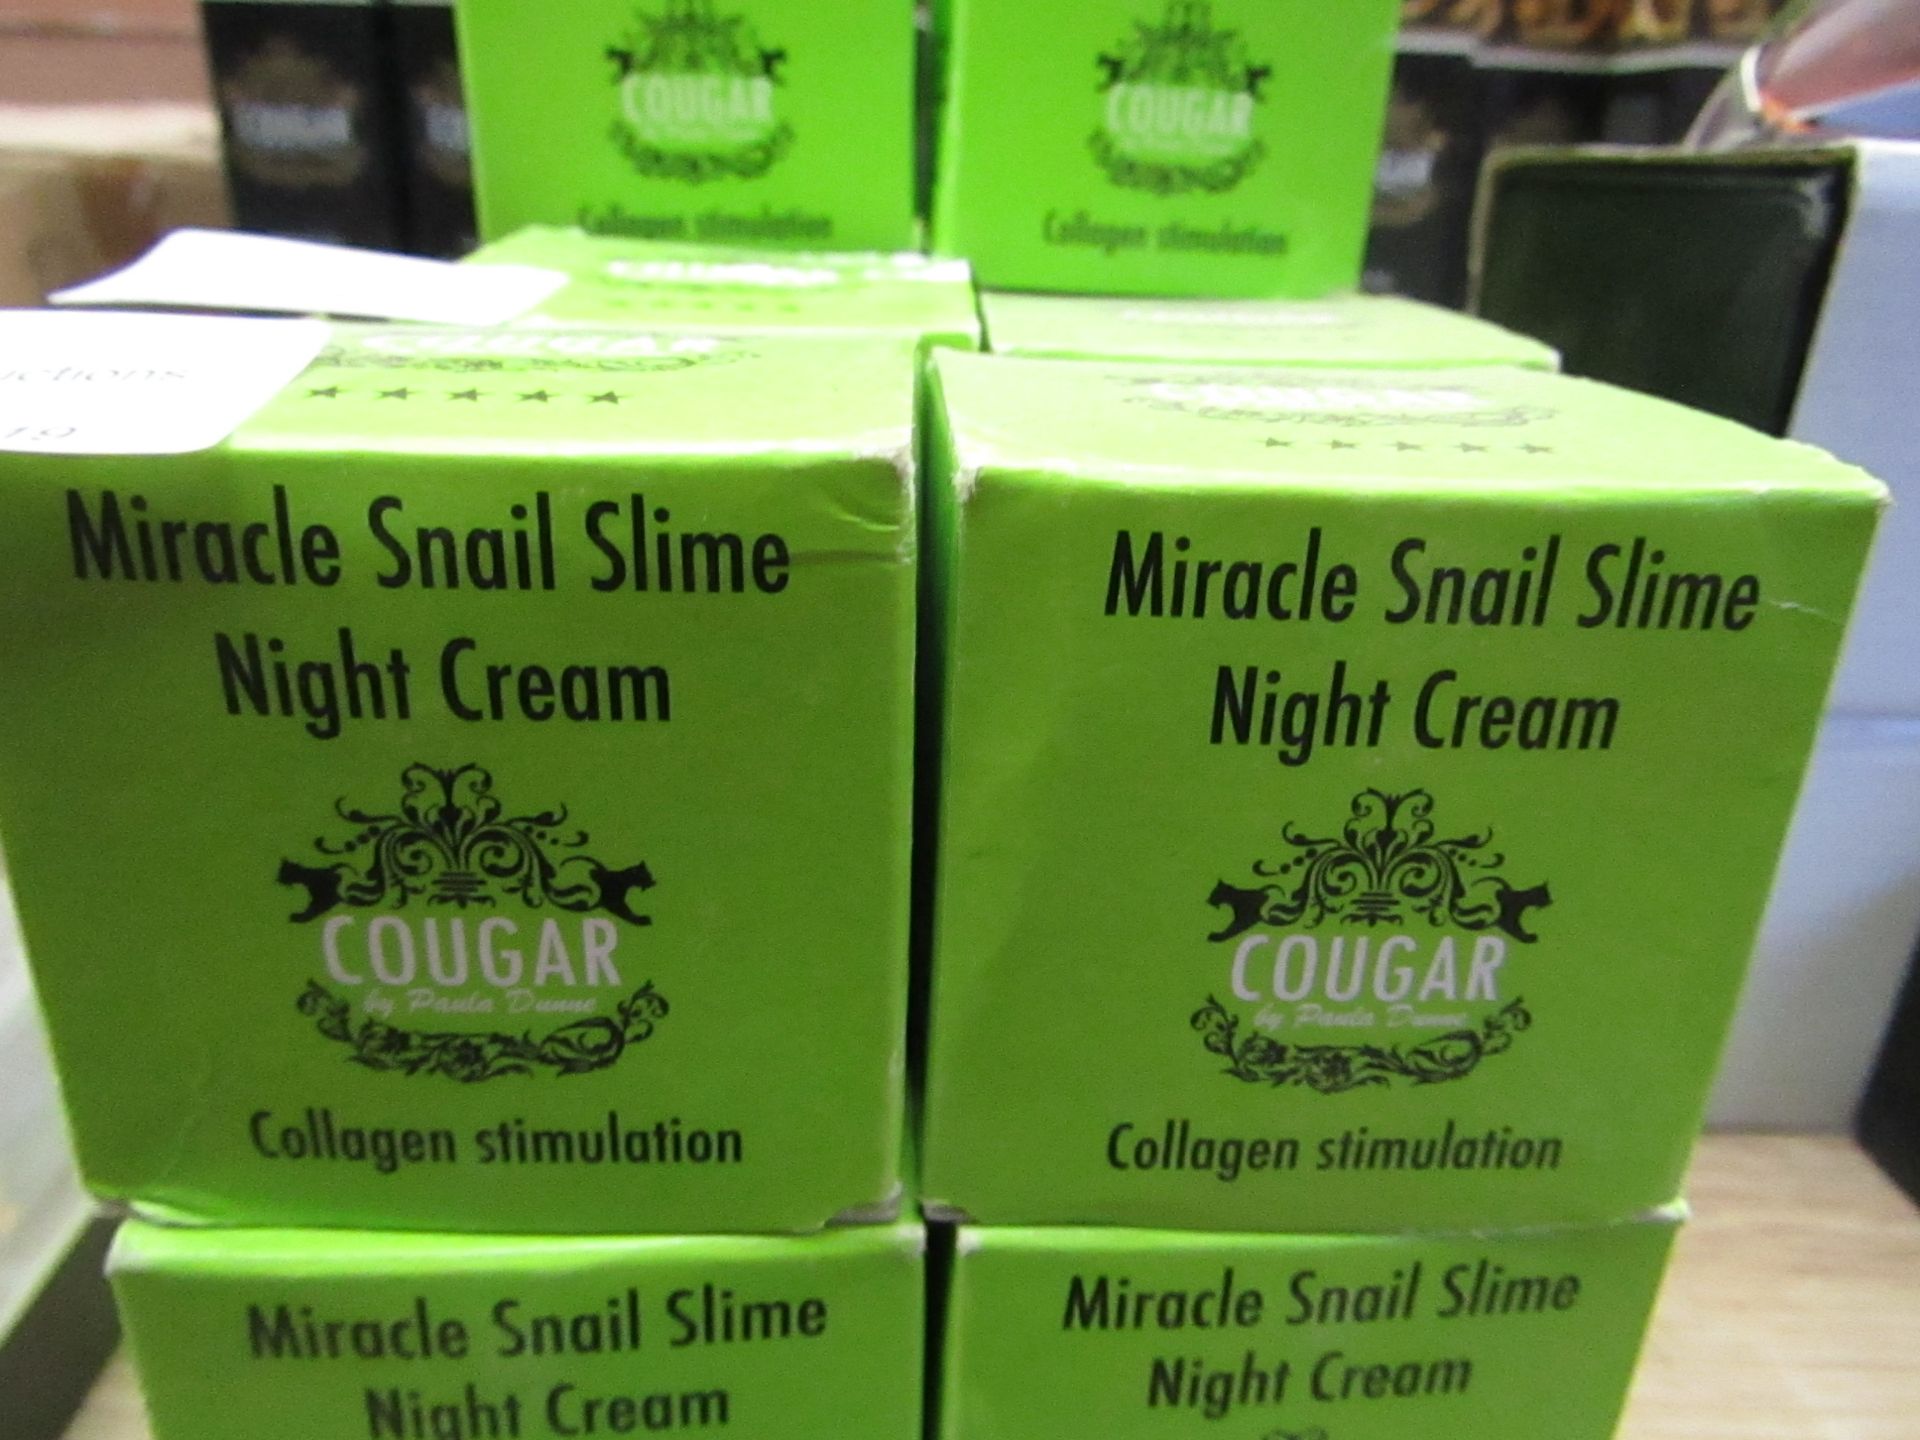 2 x 50ml tubs of Cougar Snail slime Night cream, boxed